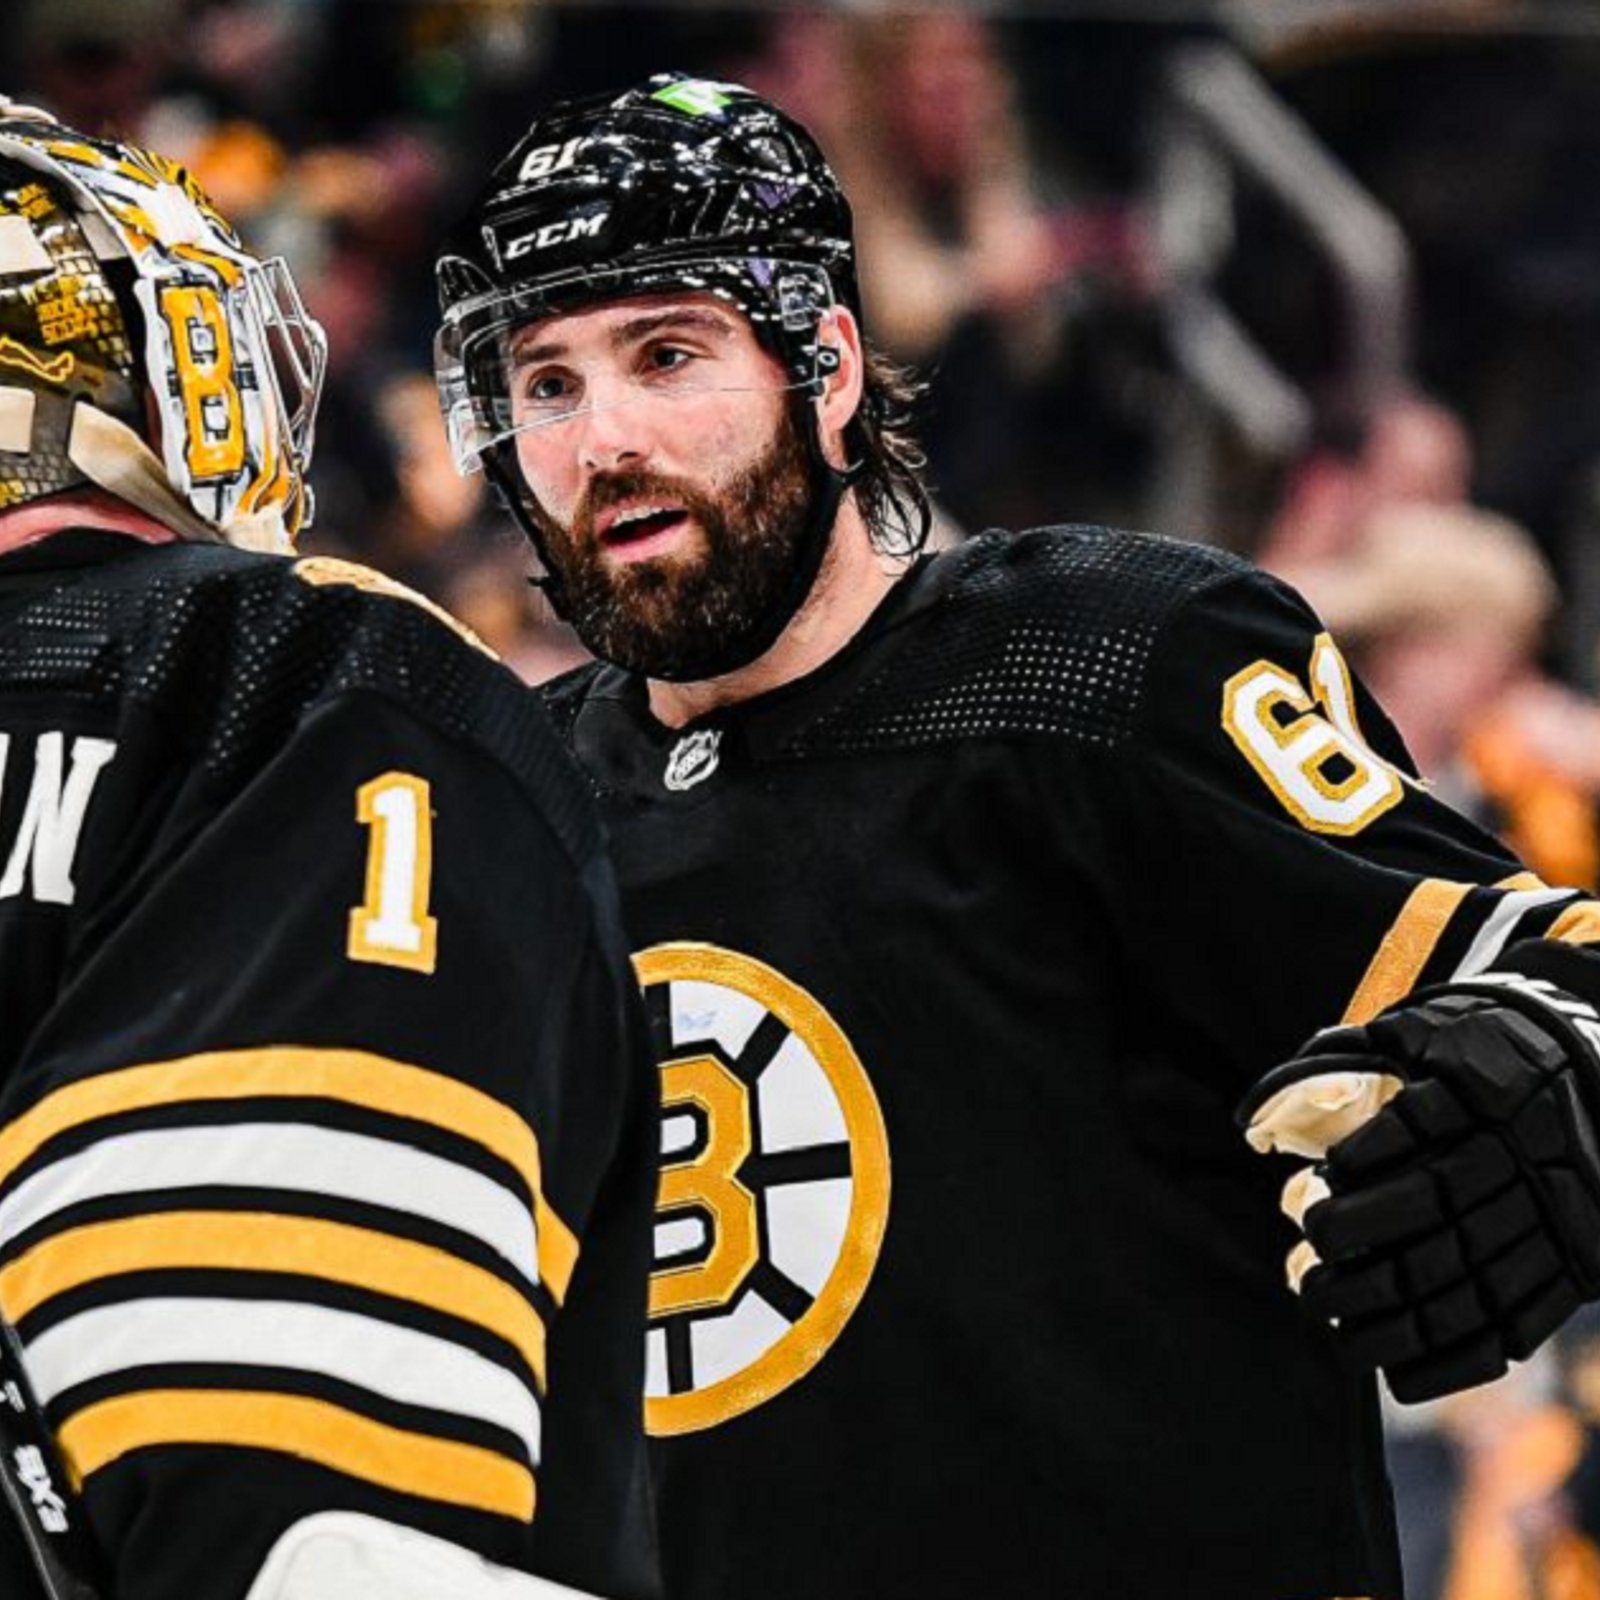 Pat Maroon sounds off on future with Boston Bruins.